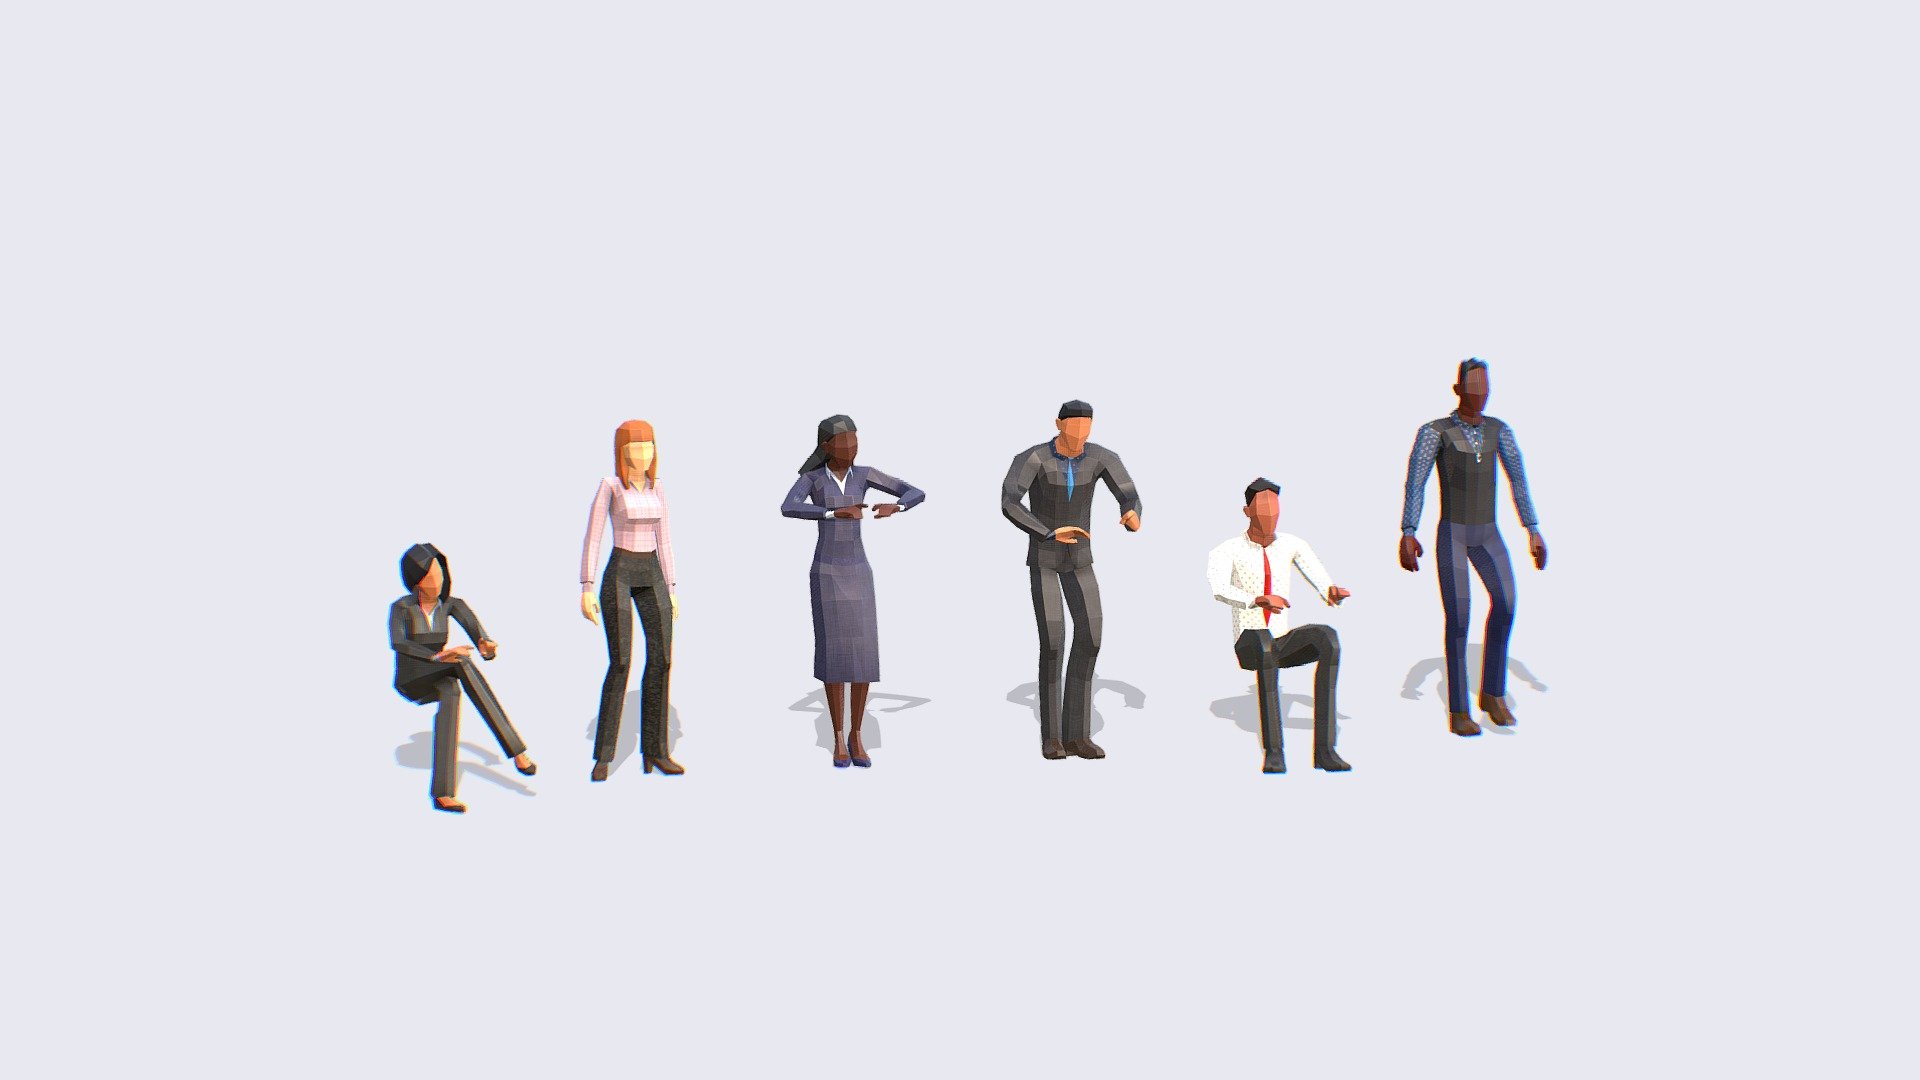 OFFICE &amp; BUSINESS PEOPLE
Our animated and rigged low poly people packs come in a variety of styles and themes, from realistic and sci-fi to fantasy, and are expertly crafted to provide seamless integration into your workflow. Our experienced team animators and riggers have painstakingly created each character to ensure they move and behave with a lifelike quality that will captivate your audience.

Includes:




Independent Rest Pose in files: FBX, OBJ, GLB -for easy rigging

Independent Animated -FBX, BLEND (Native) -file includes all 6 animations

Textures created for the pack.

PROPS AND EXTRA MODELS INCLUDED AS SEEN ON 3D MODEL
Make your crowds stand out from your competition with our collection of low poly people with amazing possibilities.





This pack is the first that we upload with our 3RD GENERATION of Animated Low-Poly People and it will be included in The Compilation
 - Business People Pack - Animated & Rigged - Buy Royalty Free 3D model by Studio Ochi (@studioochi) 3d model